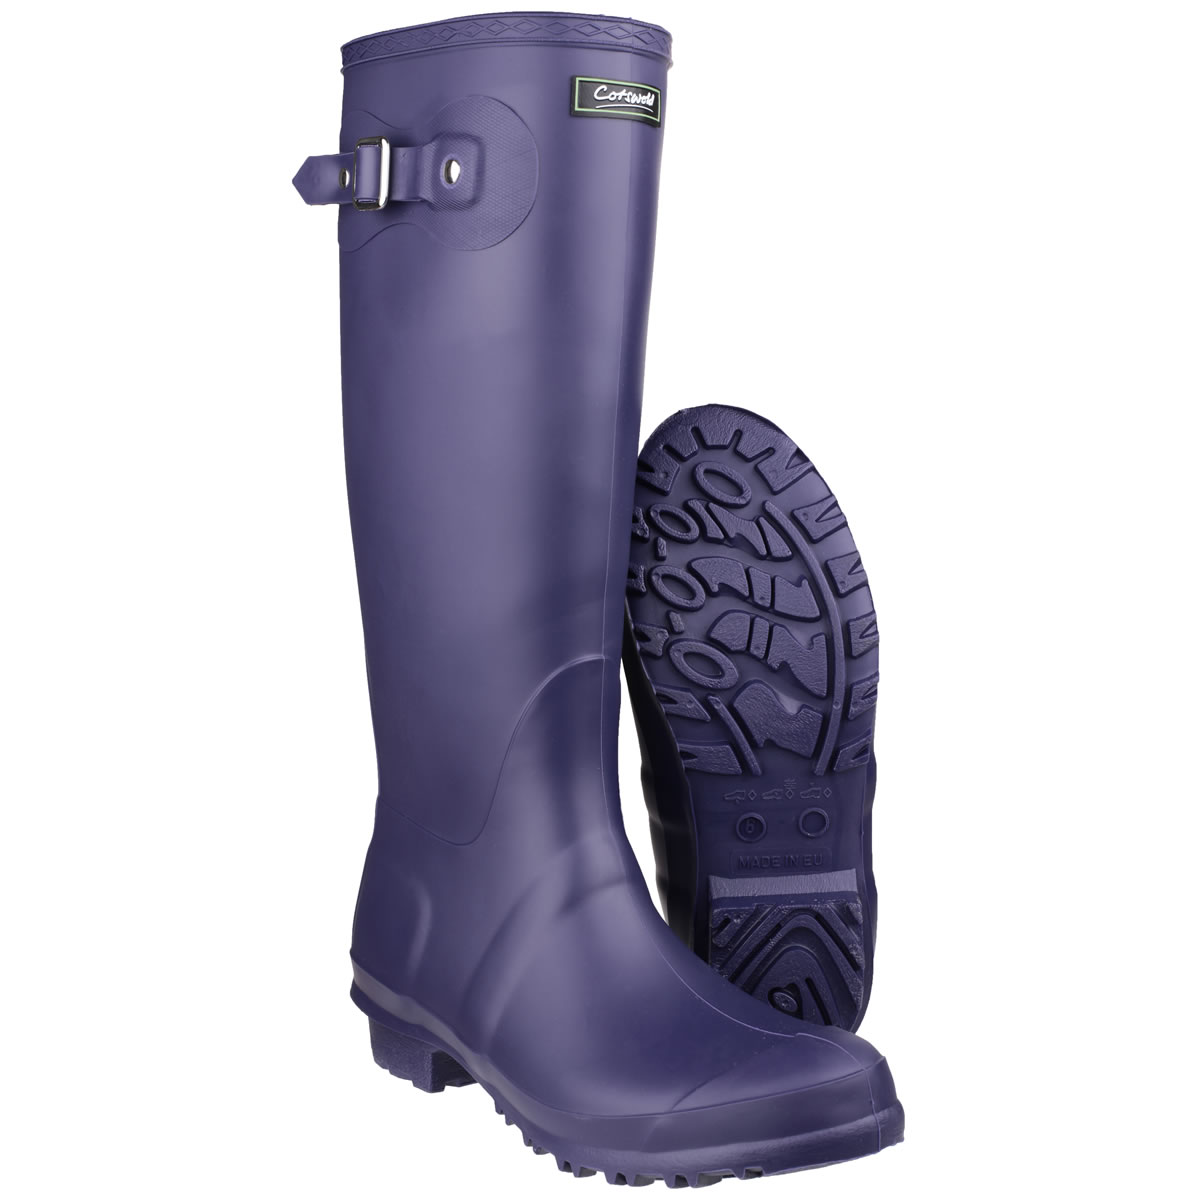 Buy > womens wellington boots size 5 > in stock